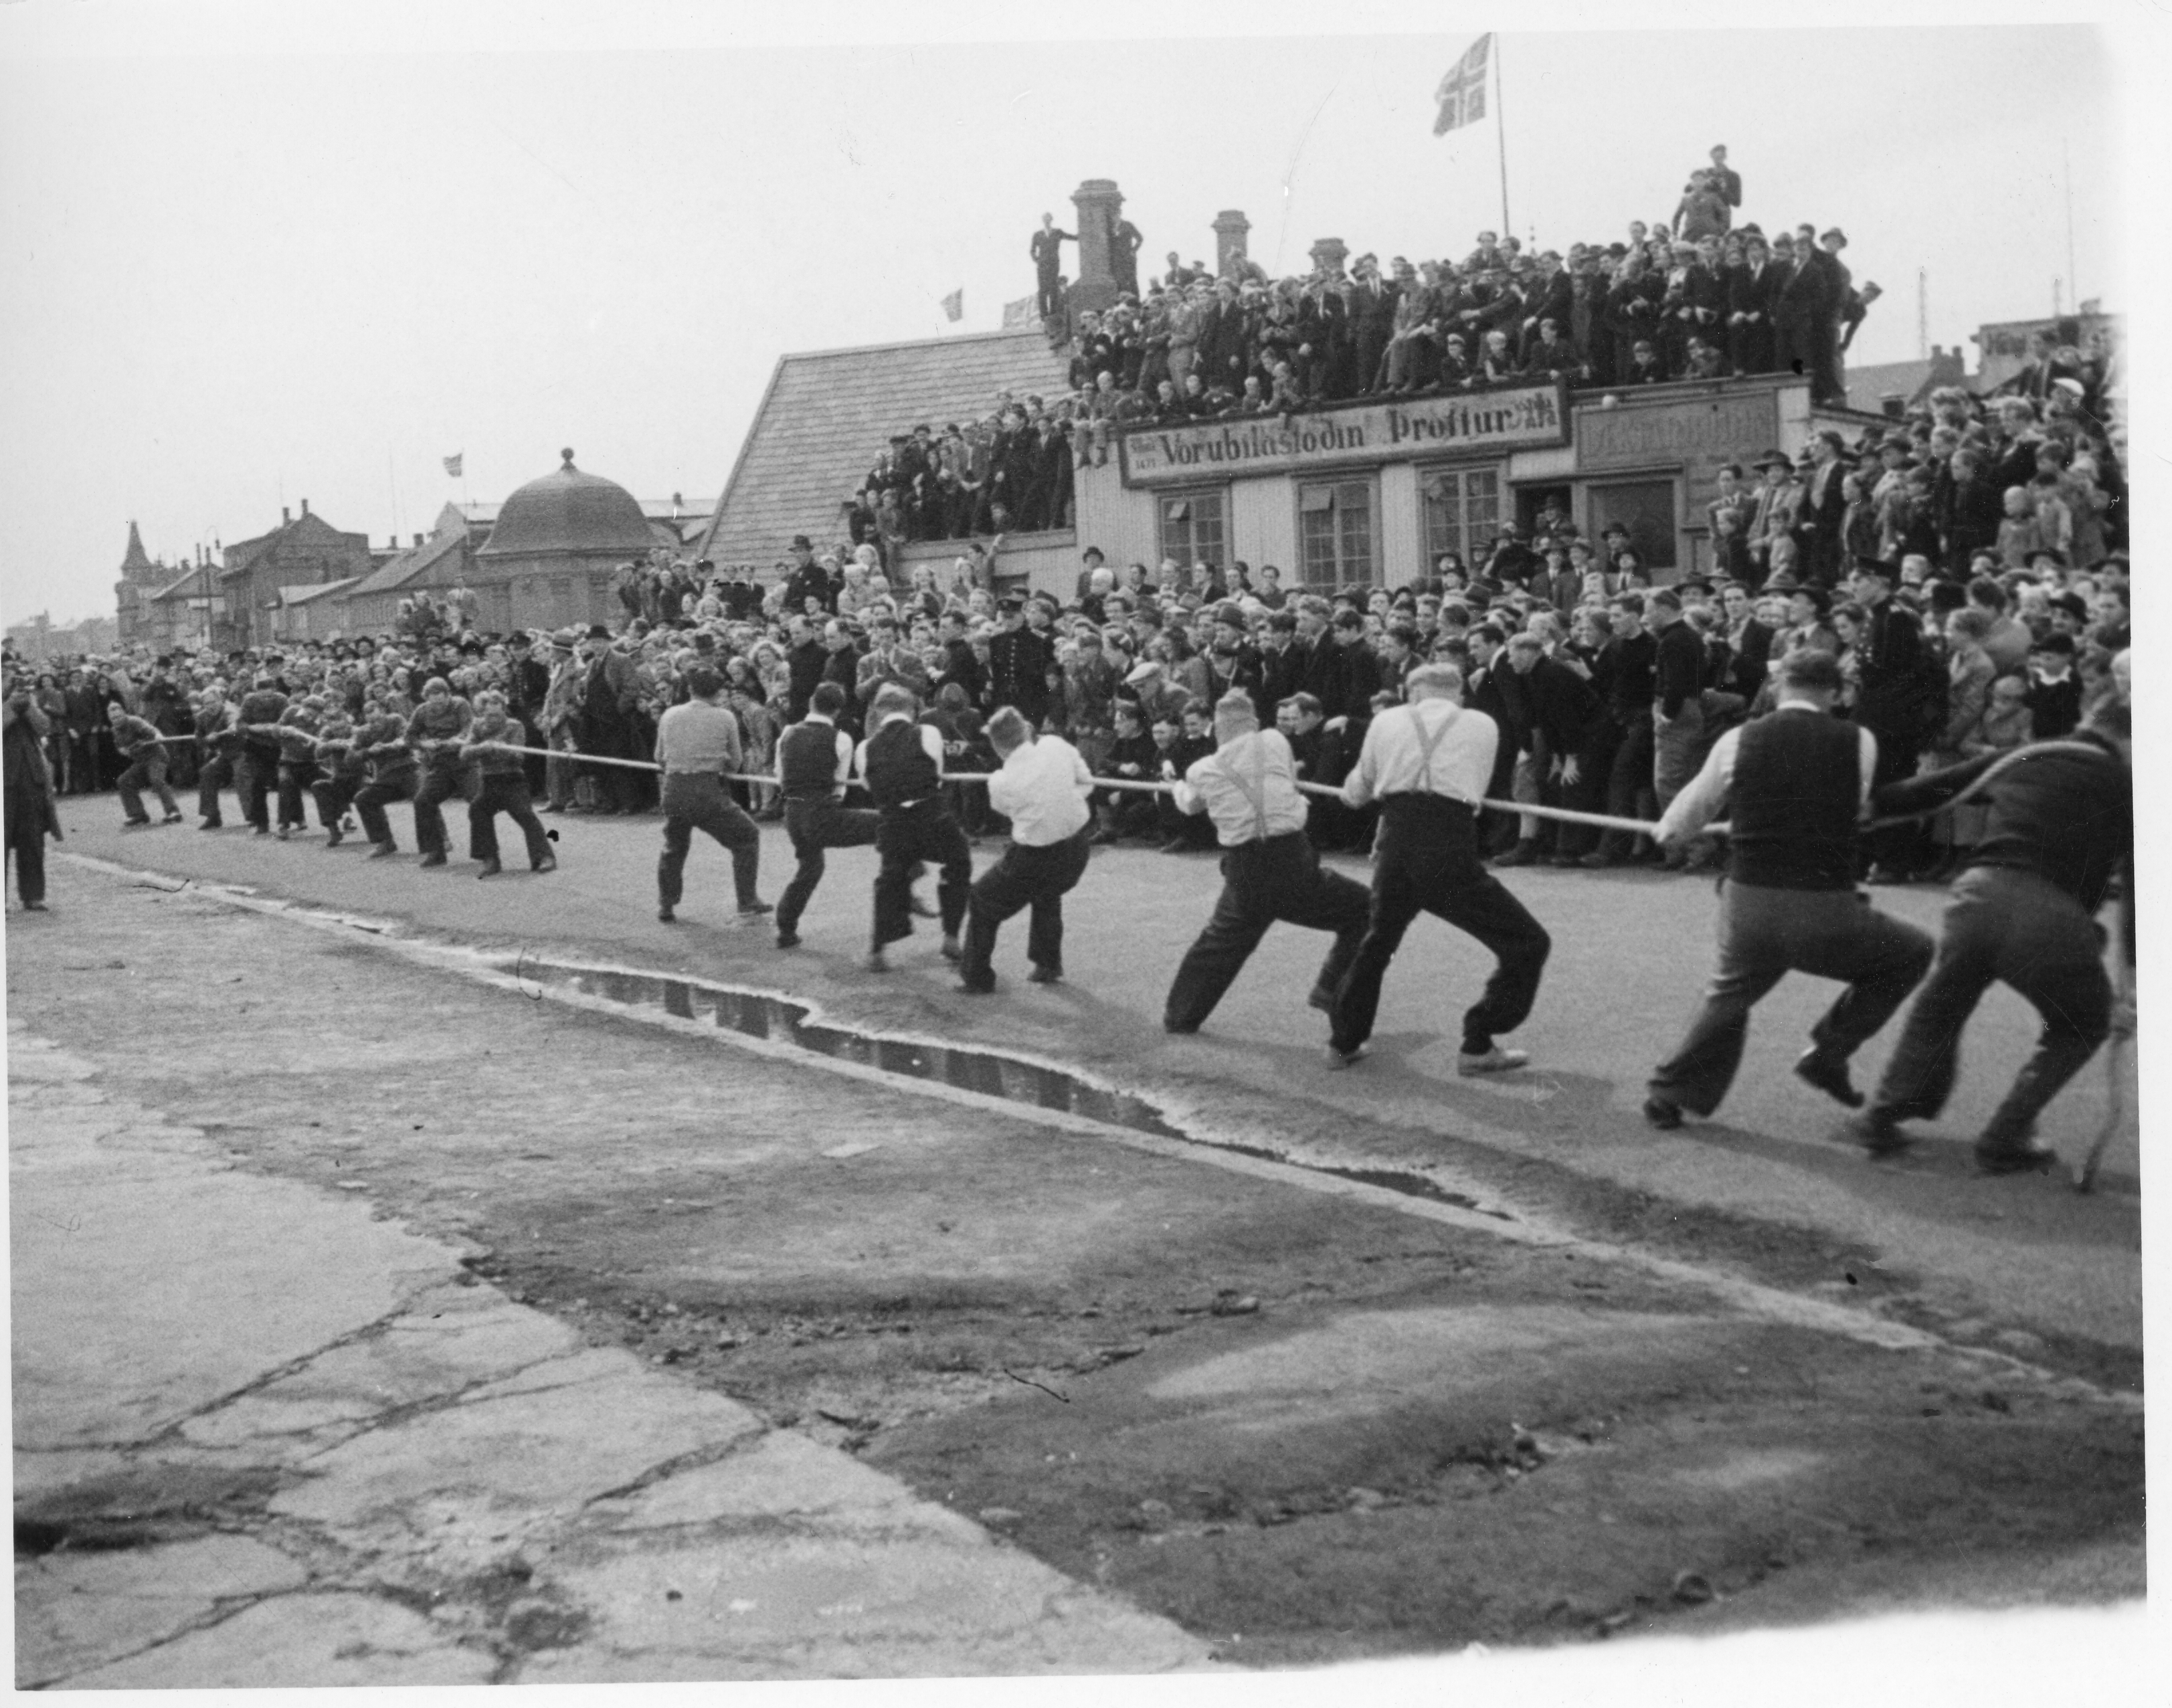 Men competing in tug war on Fisherman's Day in Reykjavík, the streets are lined with people watching them.